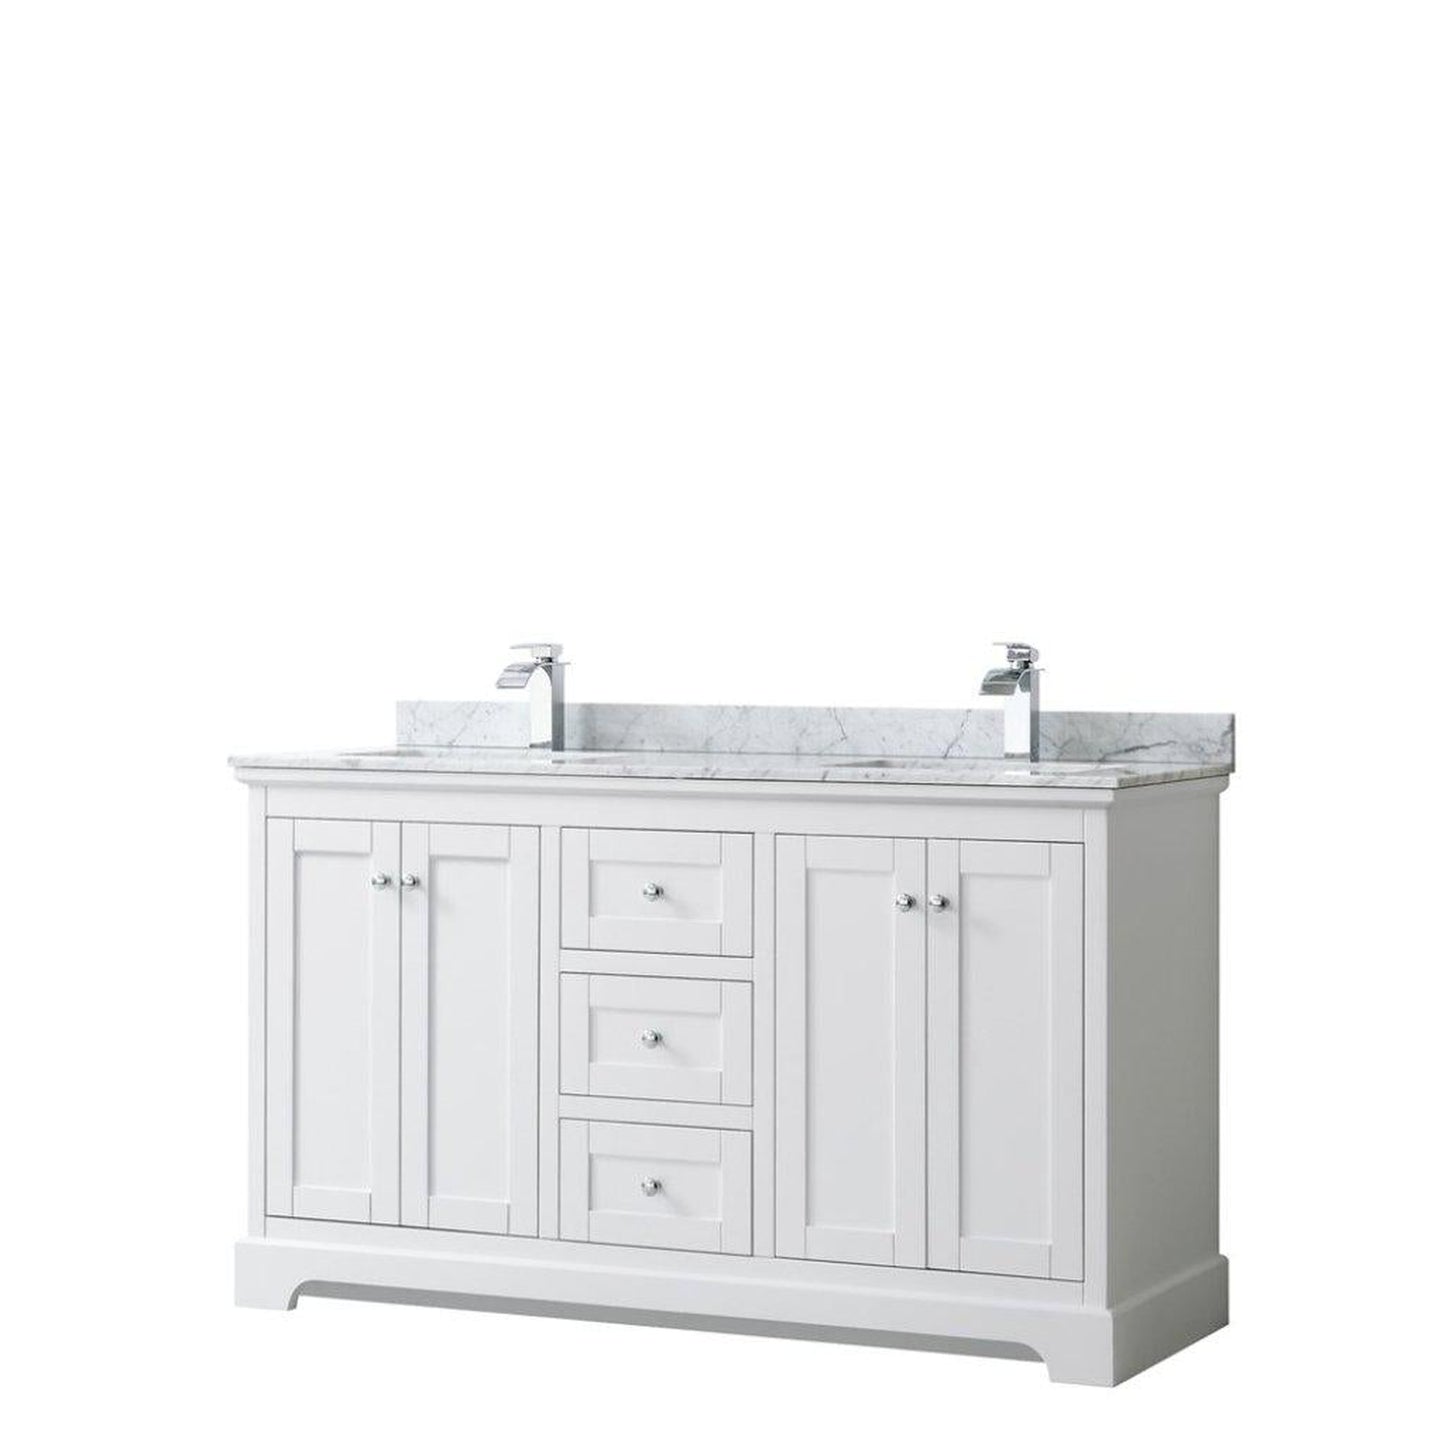 Wyndham Collection Avery 60" White Double Bathroom Vanity, White Carrara Marble Countertop With 1-Hole Faucet, Square Sink, Polished Chrome Trims